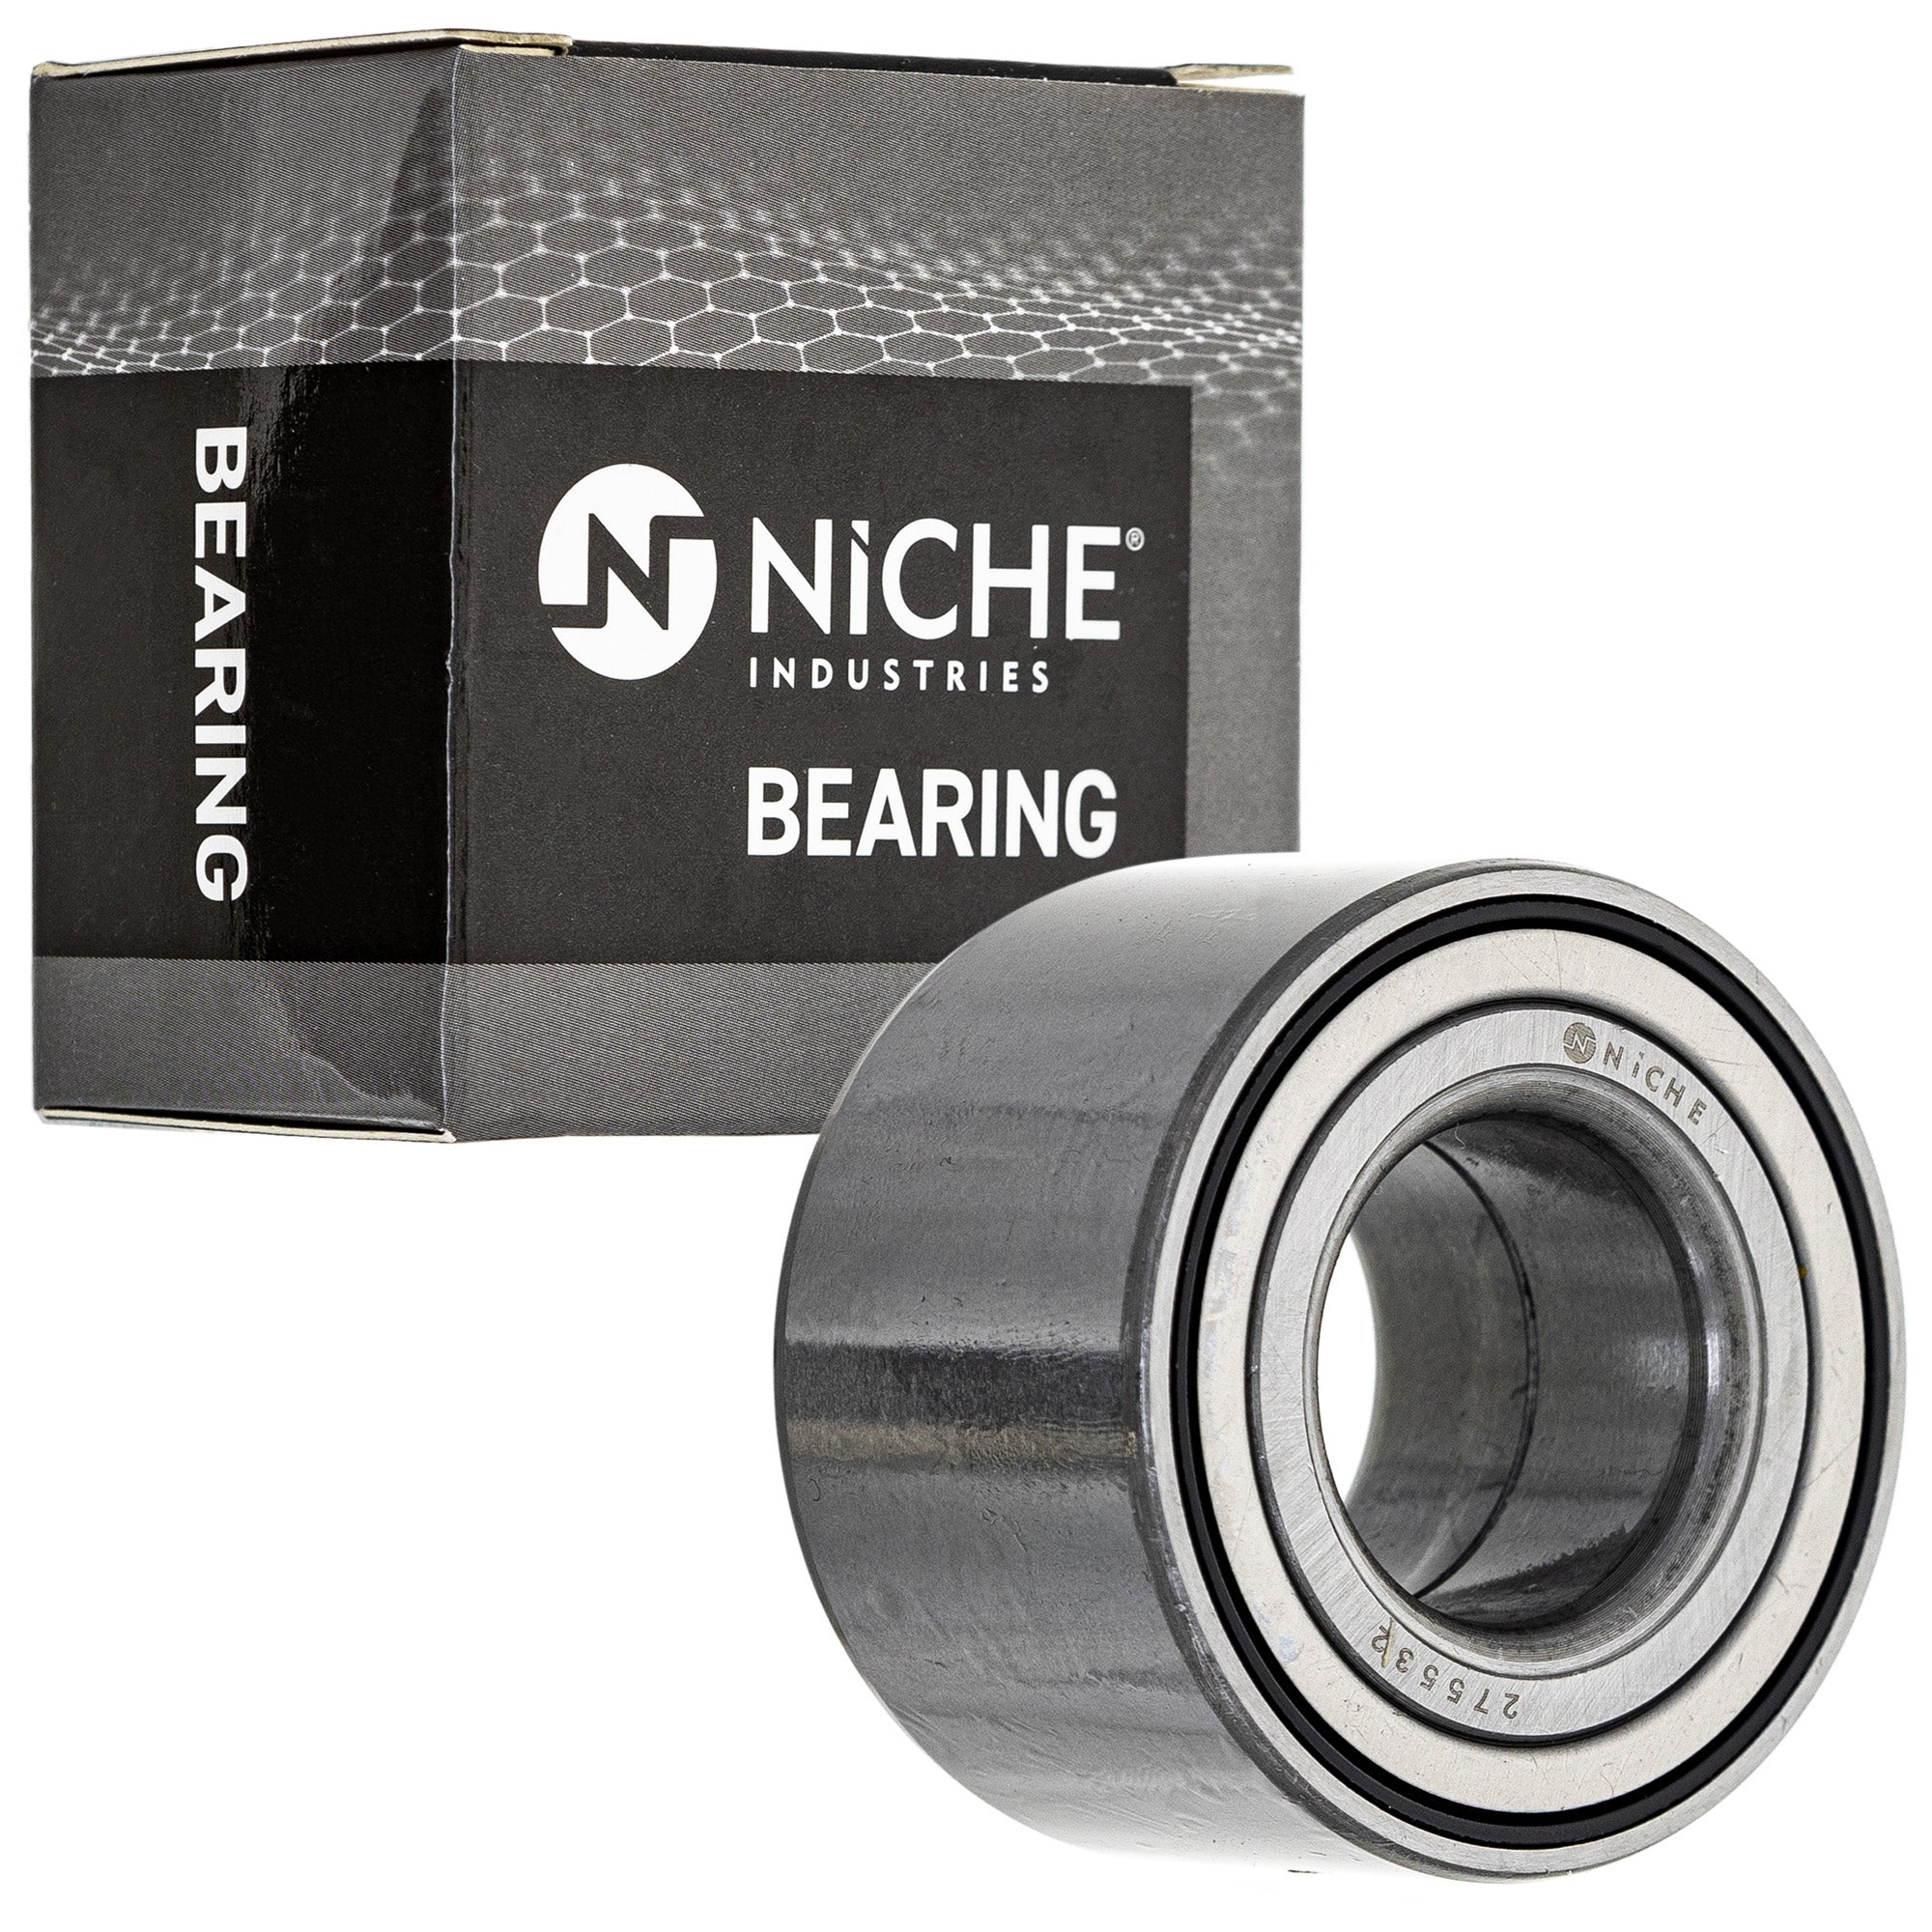 NICHE 519-CBB2289R Bearing 2-Pack for zOTHER Trials Trail Touring